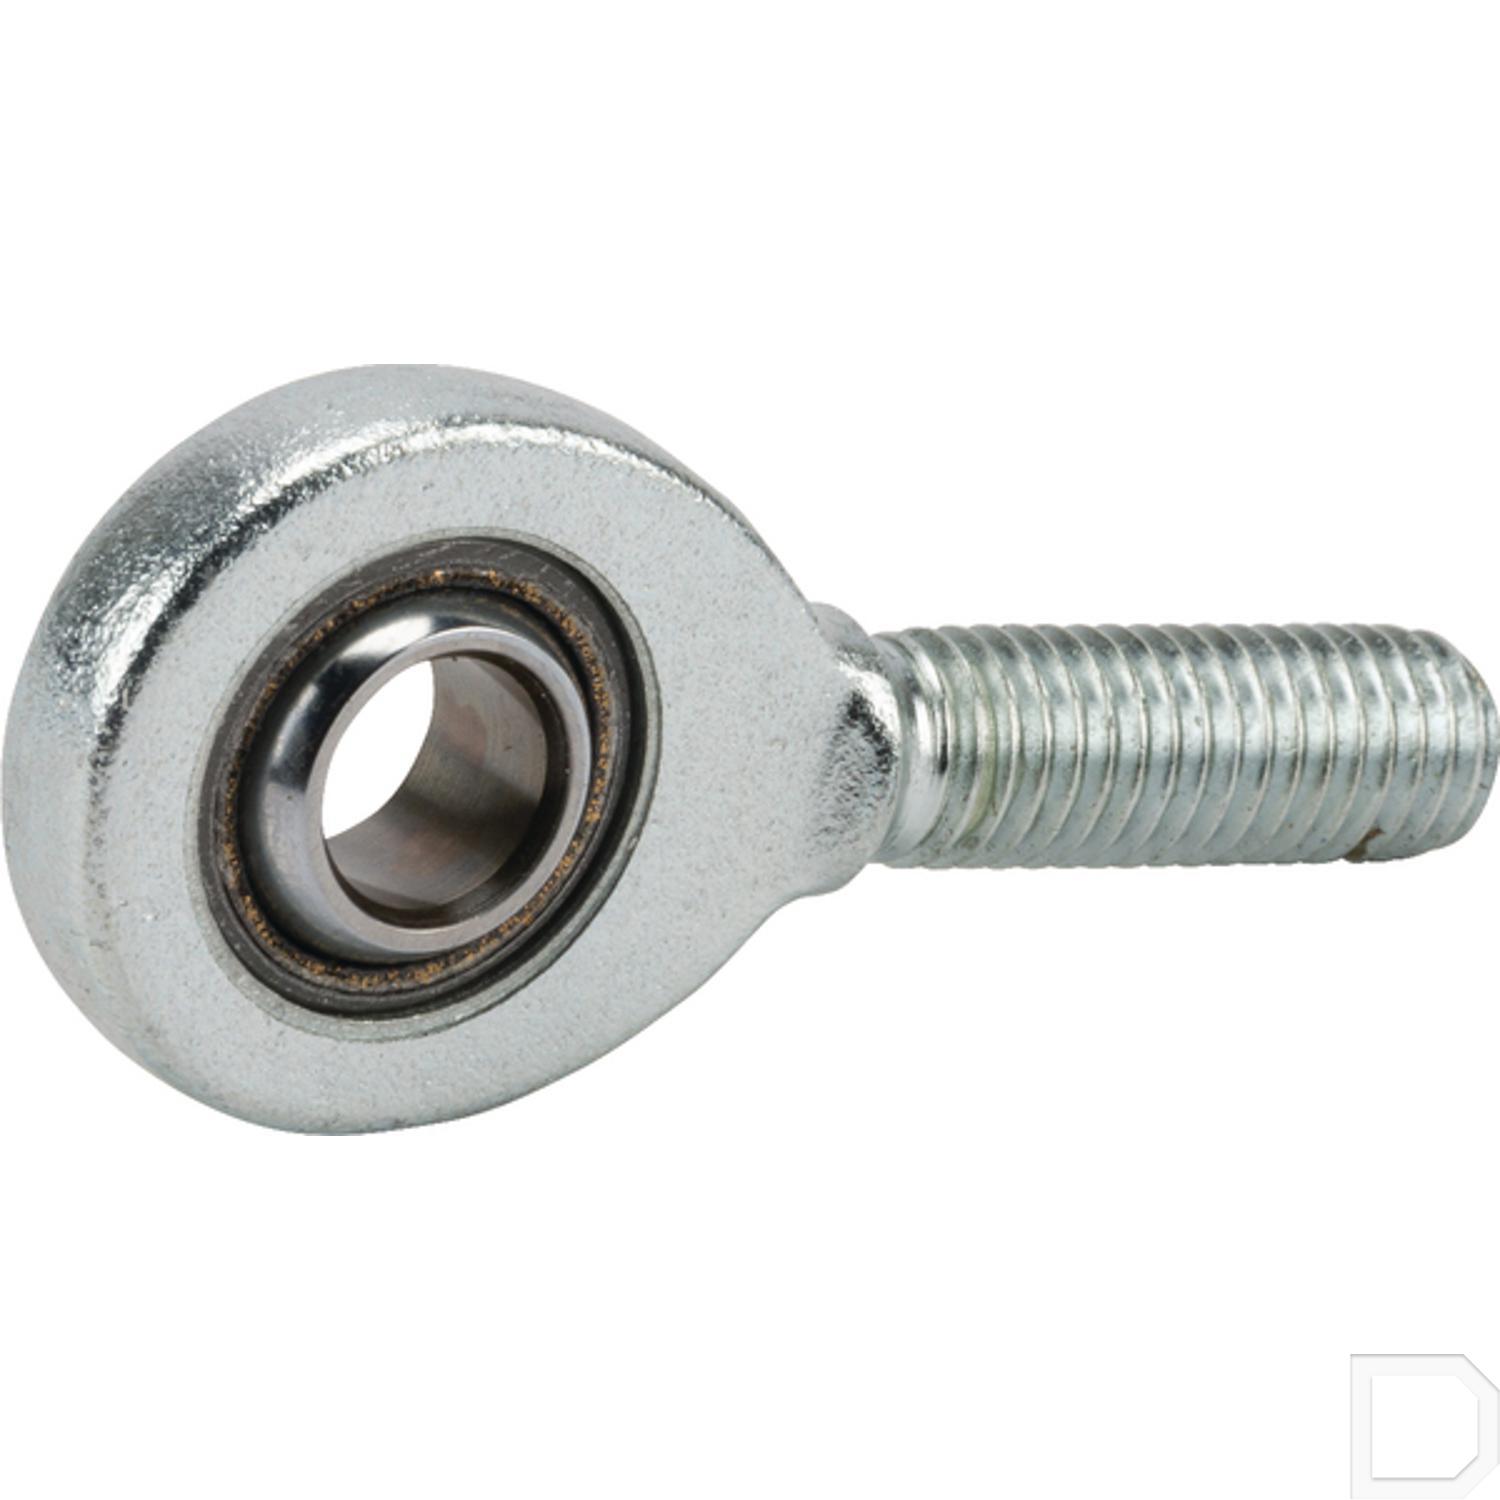 Stangkop 12mm male M12x1.75 links